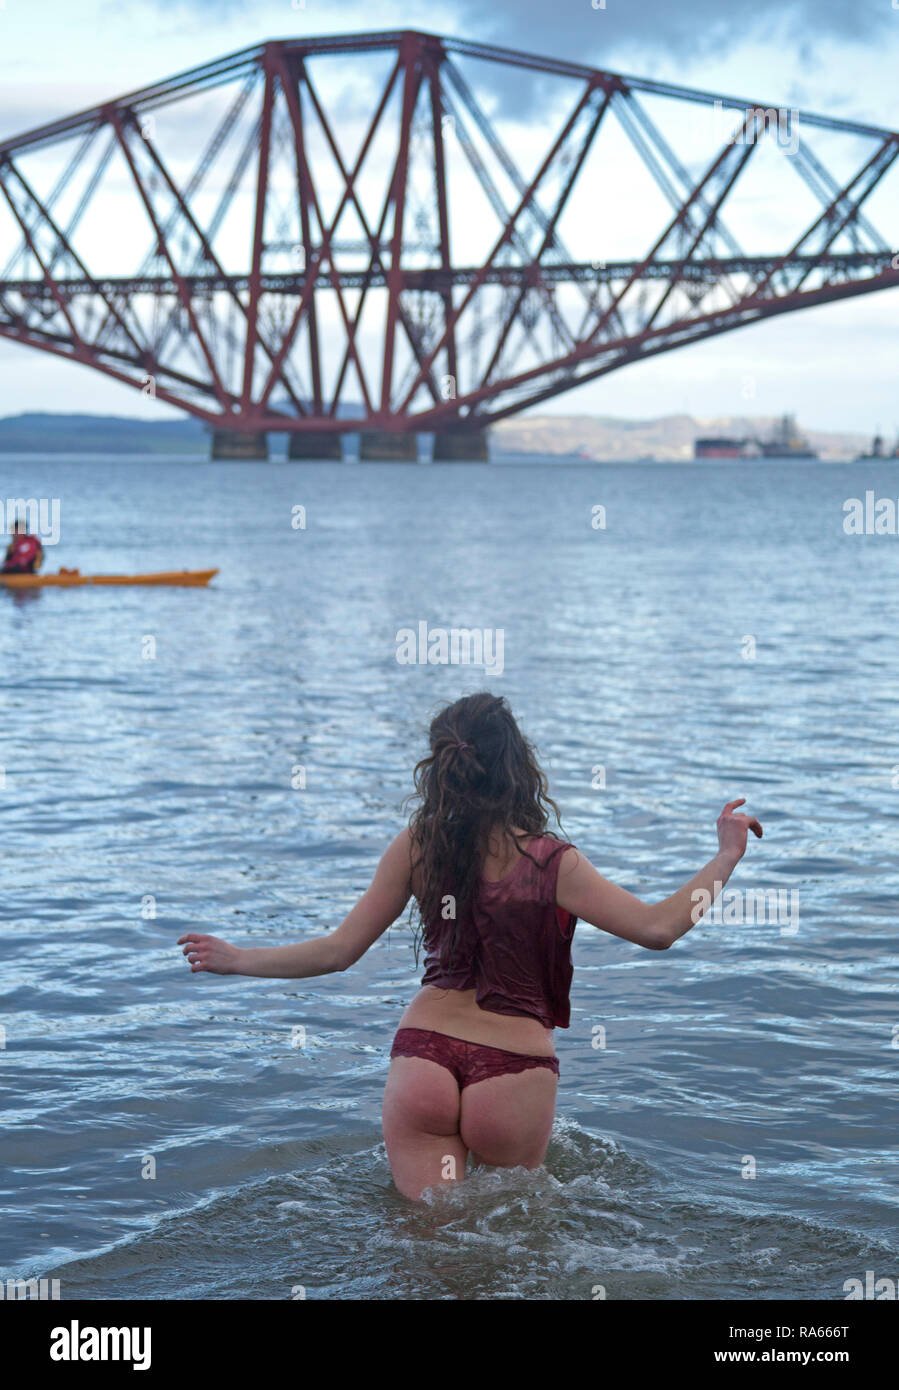 South Queensferry, Edinburgh, Scotland UK. 01 January 2019. Queensferry New Year Loony Dook, the annual dip in the Firth of Forth in the shadow of the world-famous Forth Rail Bridge. Takes place on the third day of the Edinburgh Hogmany New Year celebrations. Maximum capacity crowd Stock Photo